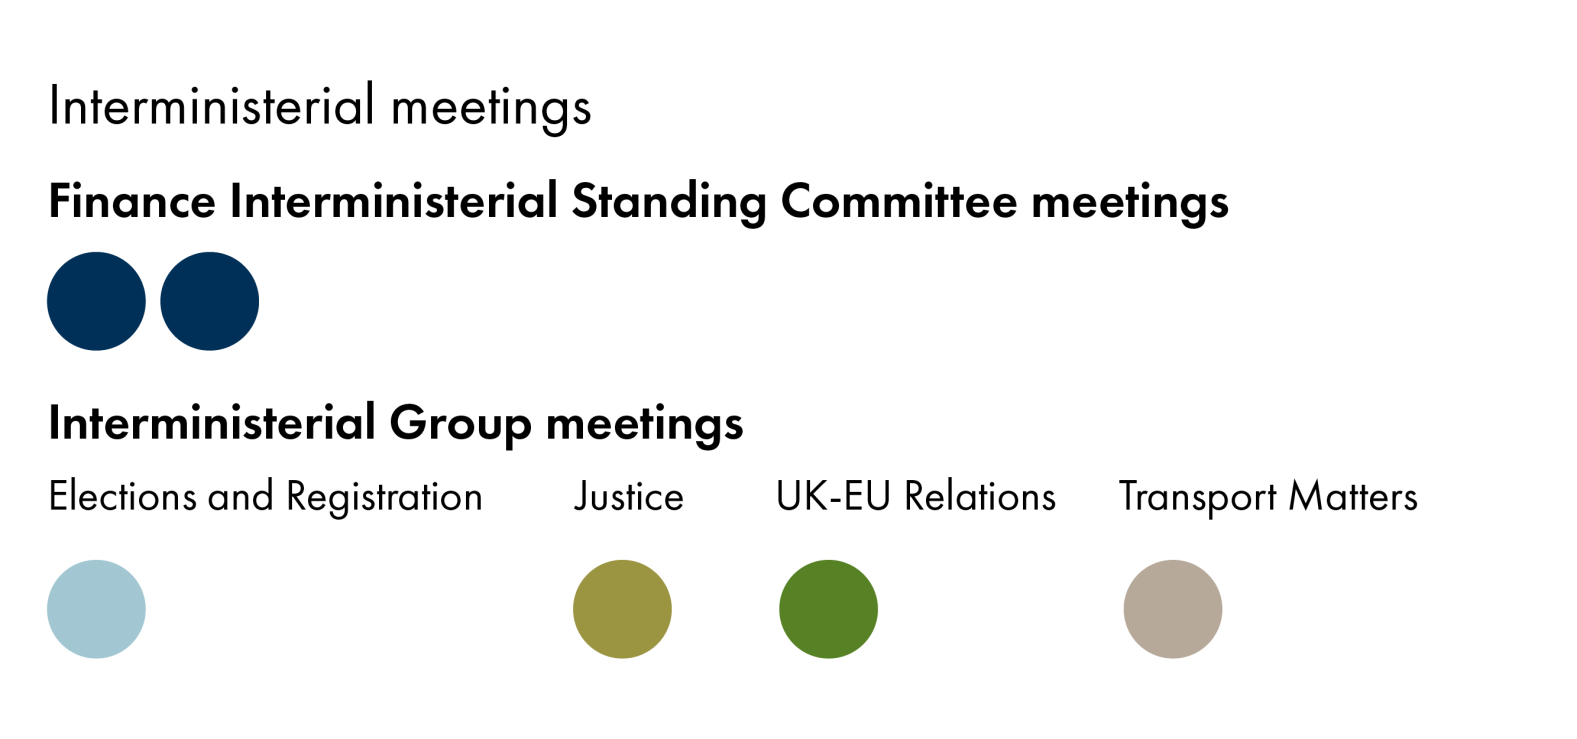 The infographic shows the number of interministerial meetings. Finance Interministerial Standing Committee meetings: 2, IMG Elections and Registration: 1, IMG Justice: 1, IMG UK-EU Relations: 1, IMG Transport matters: 1.